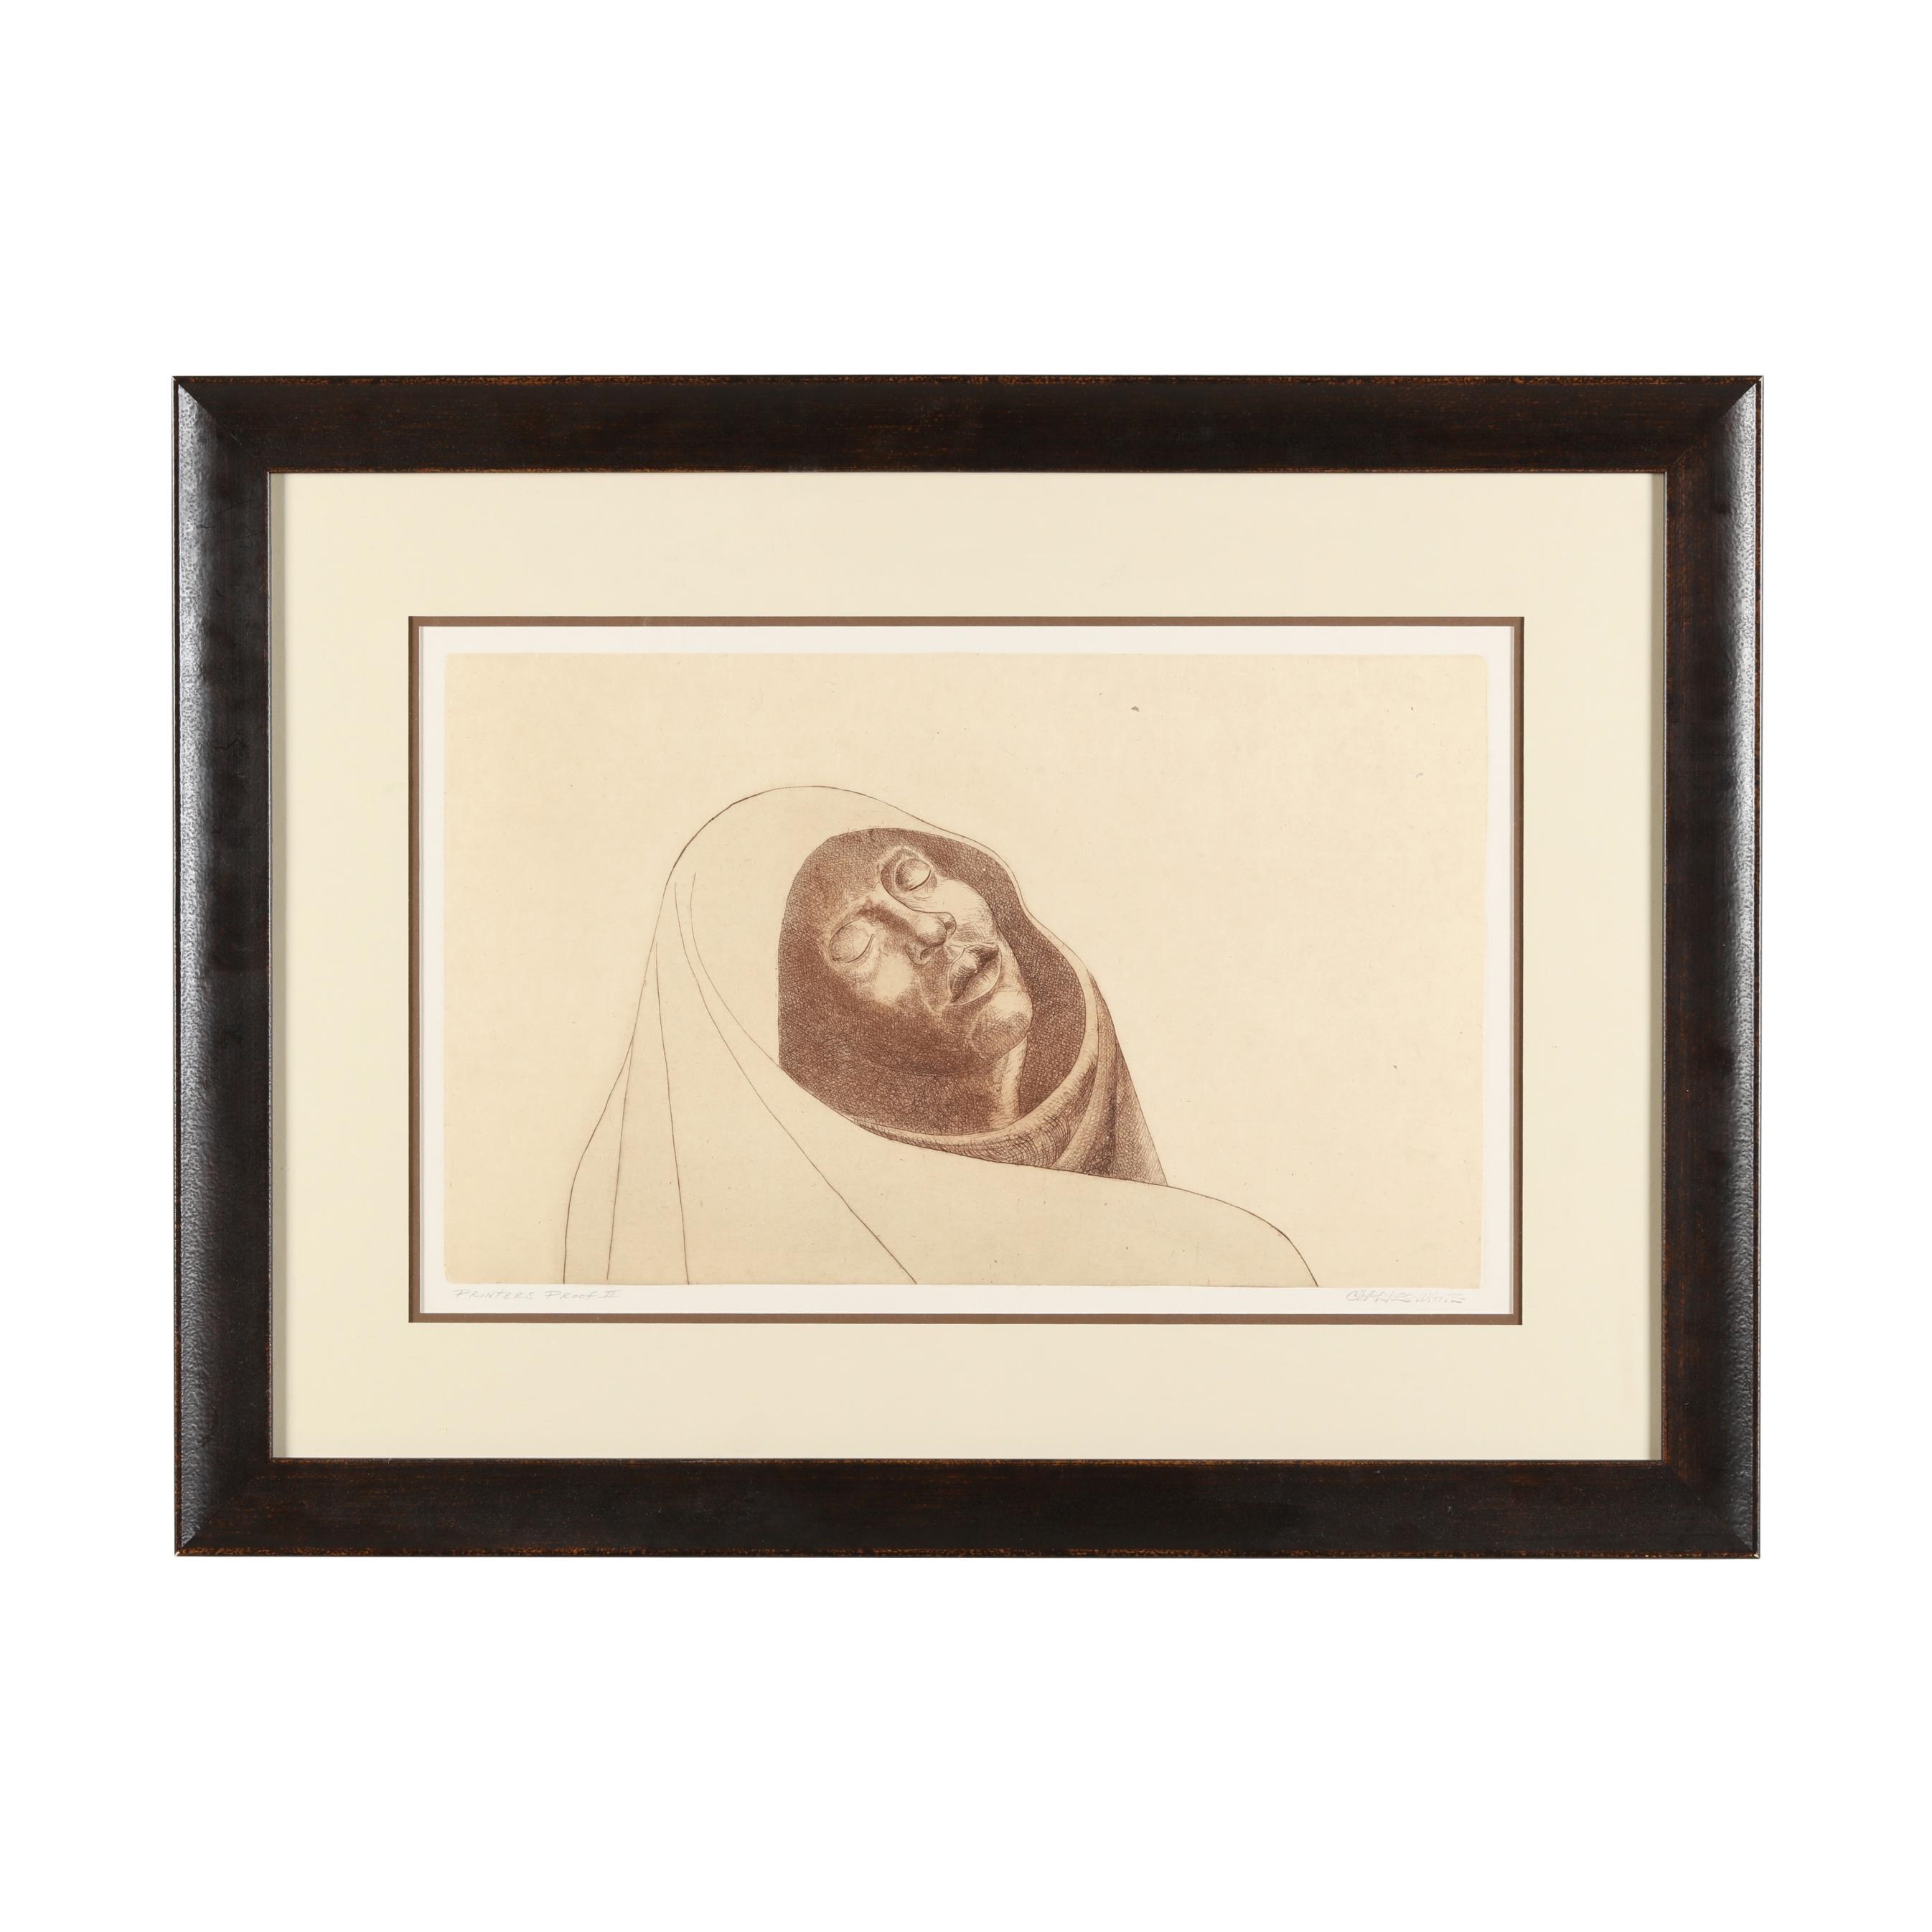 Artwork by Charles White, Madonna, Made of Etching in brown ink on chine collé